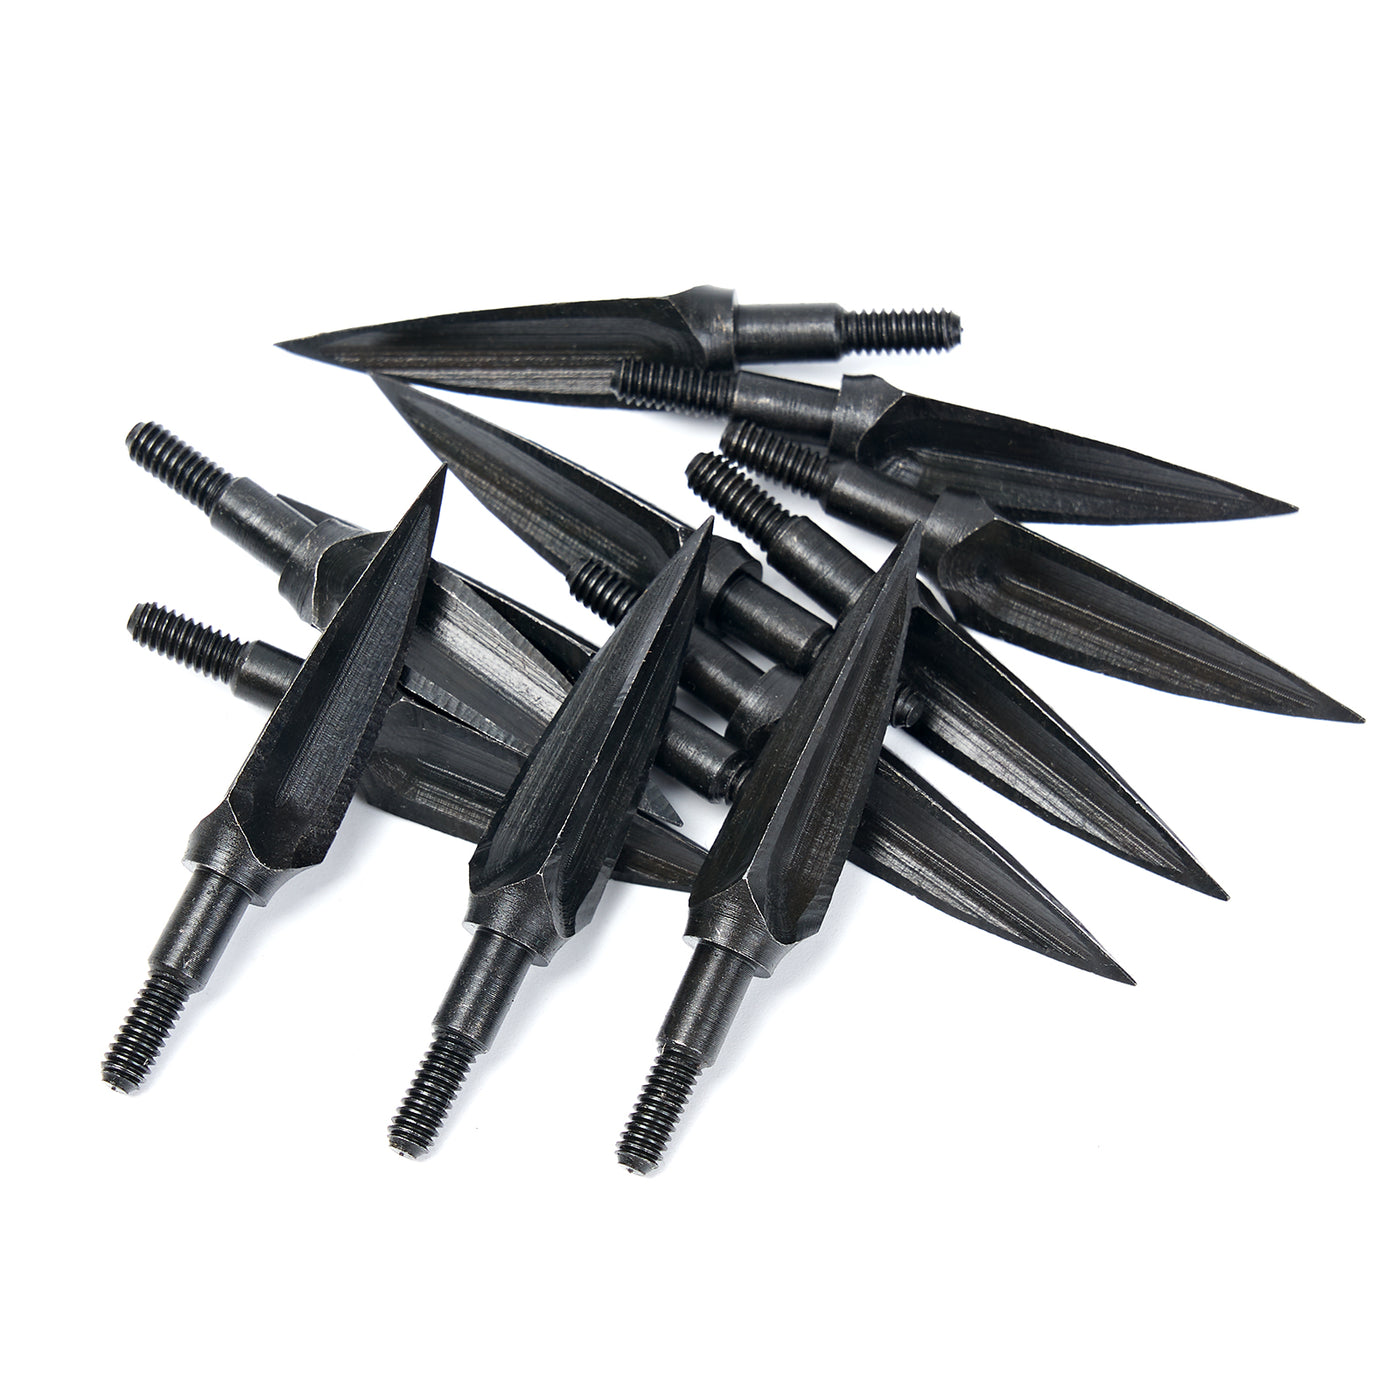 12x 3-blade 125 Grain Carbon Steel Willow Leaf Archery Arrowheads Tips Black For Hunting